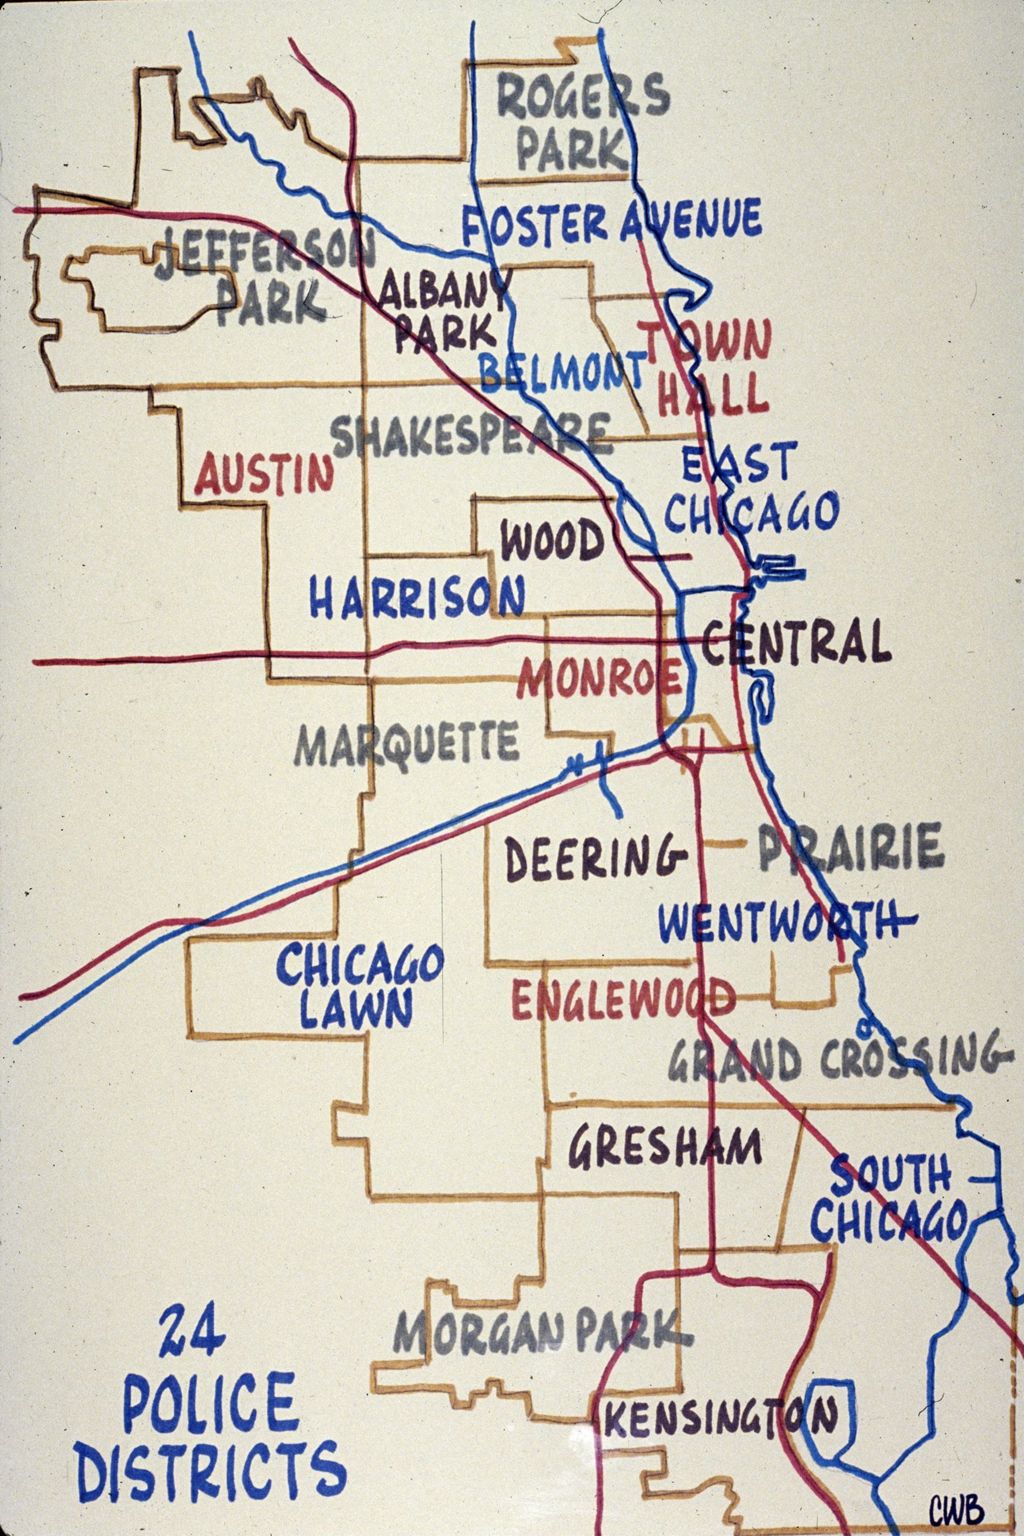 Miniature of Chicago police districts